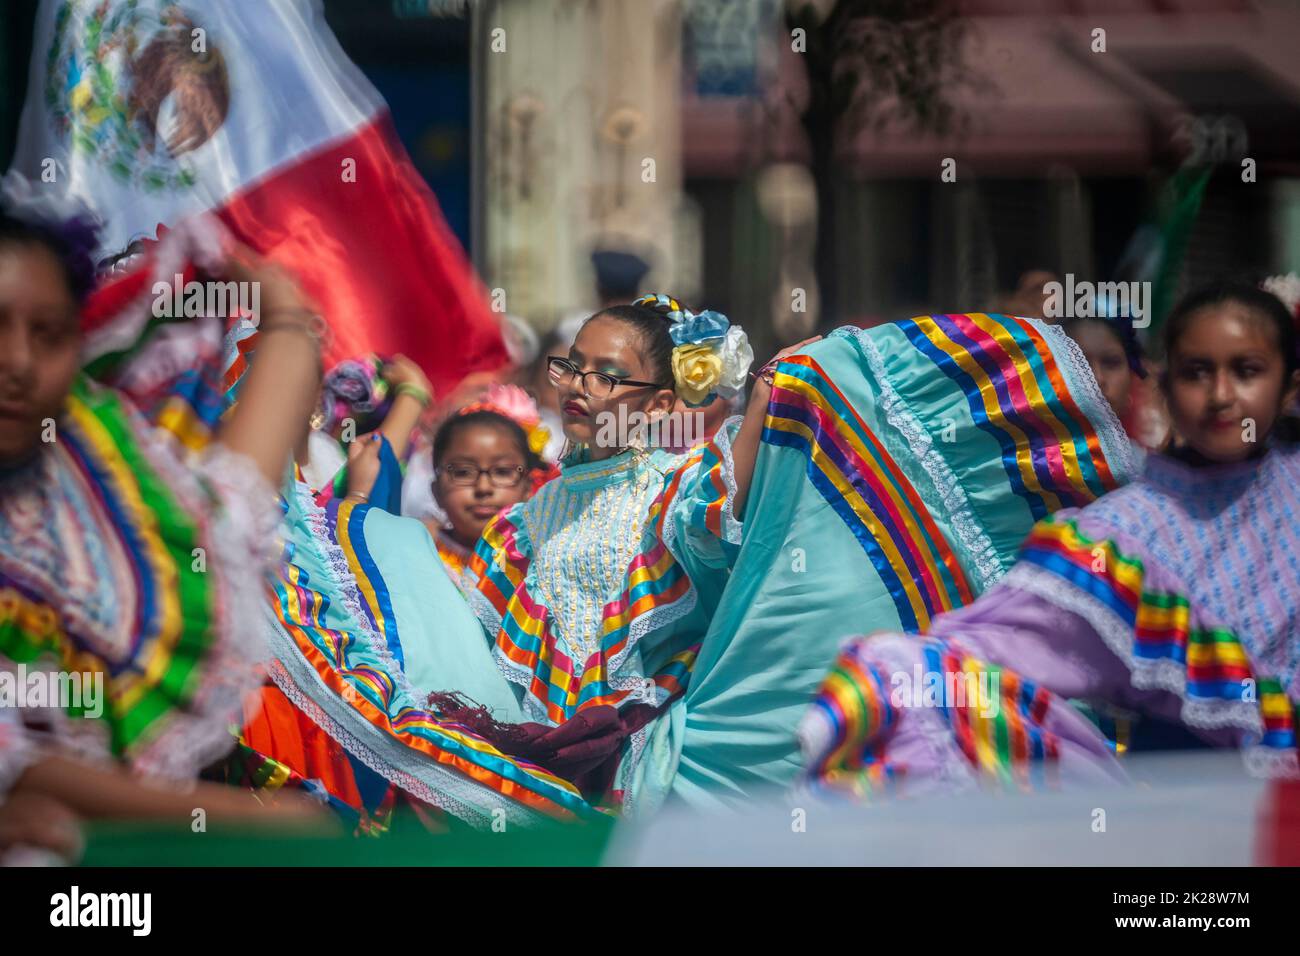 Mexican-Americans gather on Madison Avenue in New York on Sunday, September 18, 2022 for the annual Mexican Independence Day Parade. The parades that take place from the spring into the fall in New York celebrate the cultural diversity of the city. (© Richard B. Levine) Stock Photo